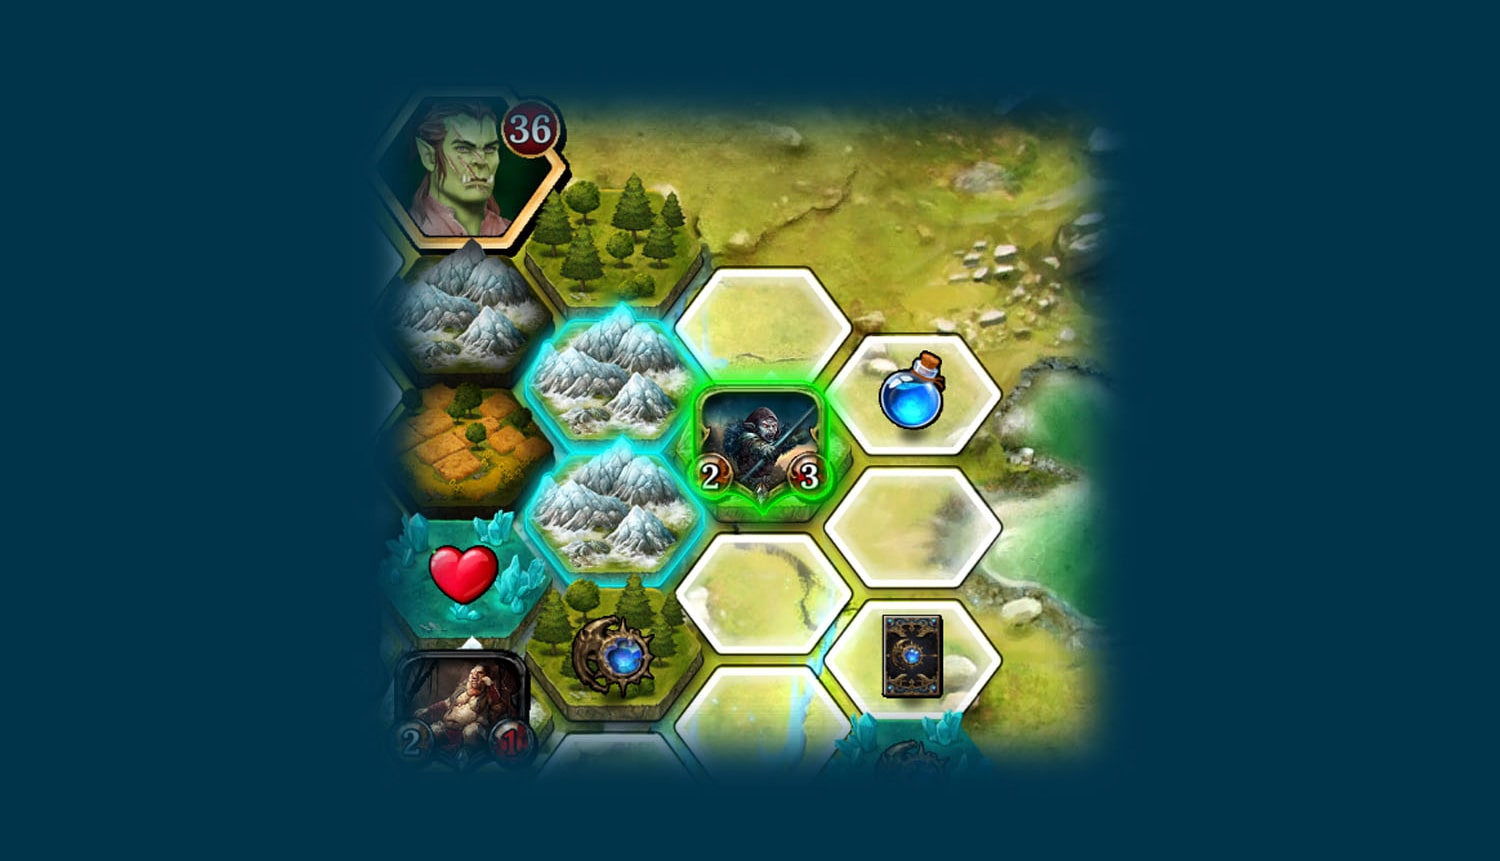 How to move units? Units that were summoned to the game board can be moved. Units can only move through existing lands of both players. Exception to that rule are flying units, which can move over empty hexes. Units can move by 1 hex, unless they have special abilities such as Fast or Flying. 